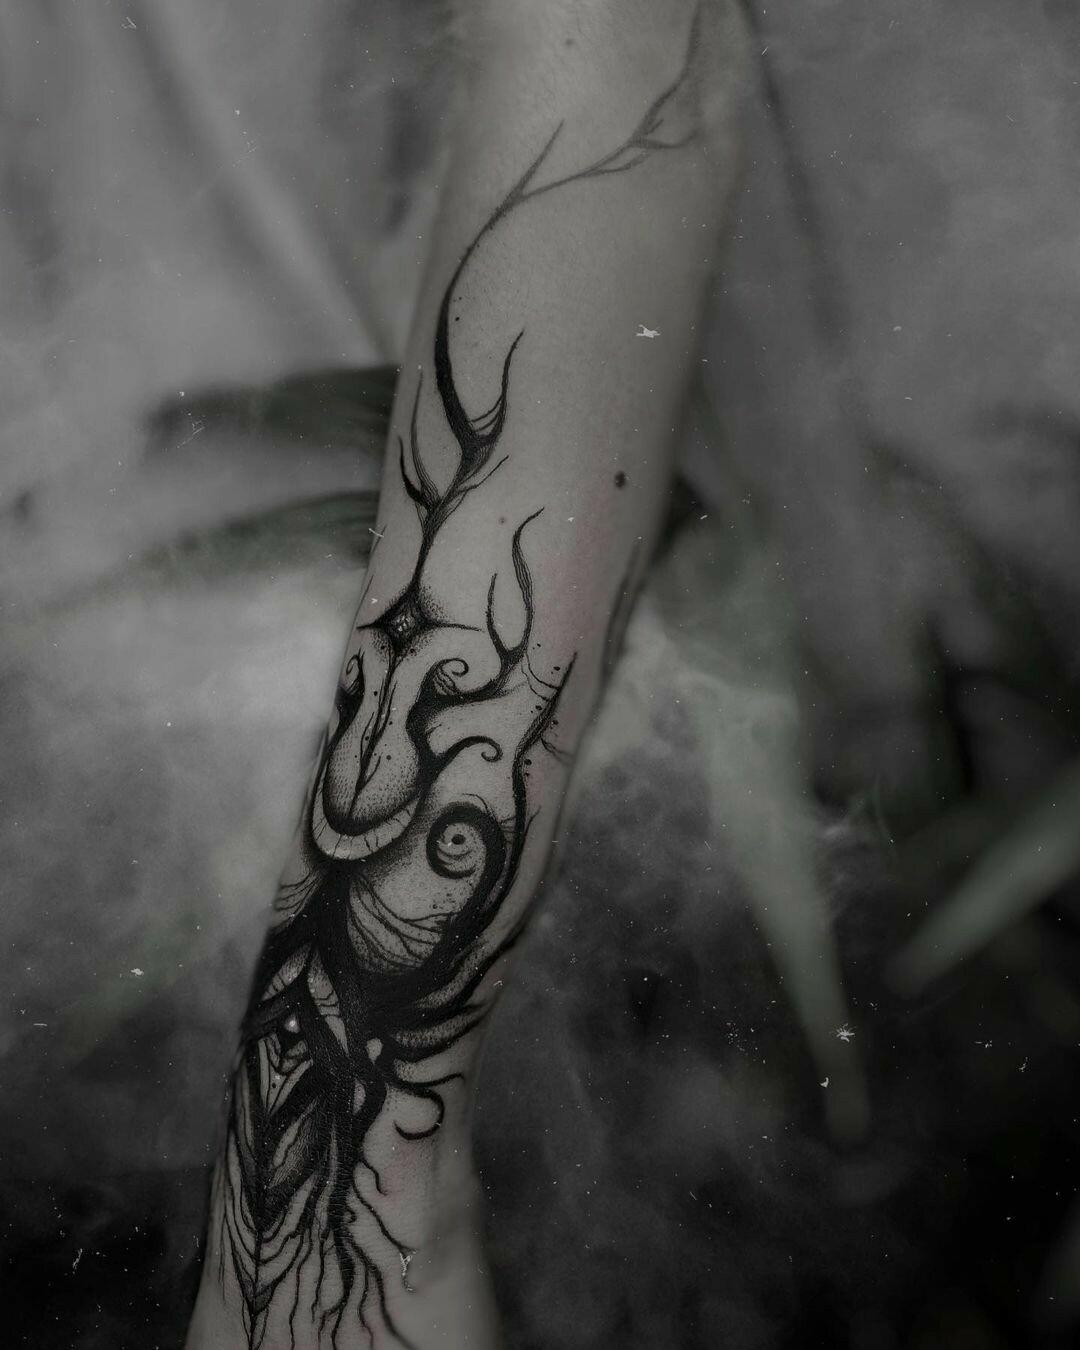 Inksearch tattoo Emanuela Latoszek 🌙 The Sacred Touch ⚜️